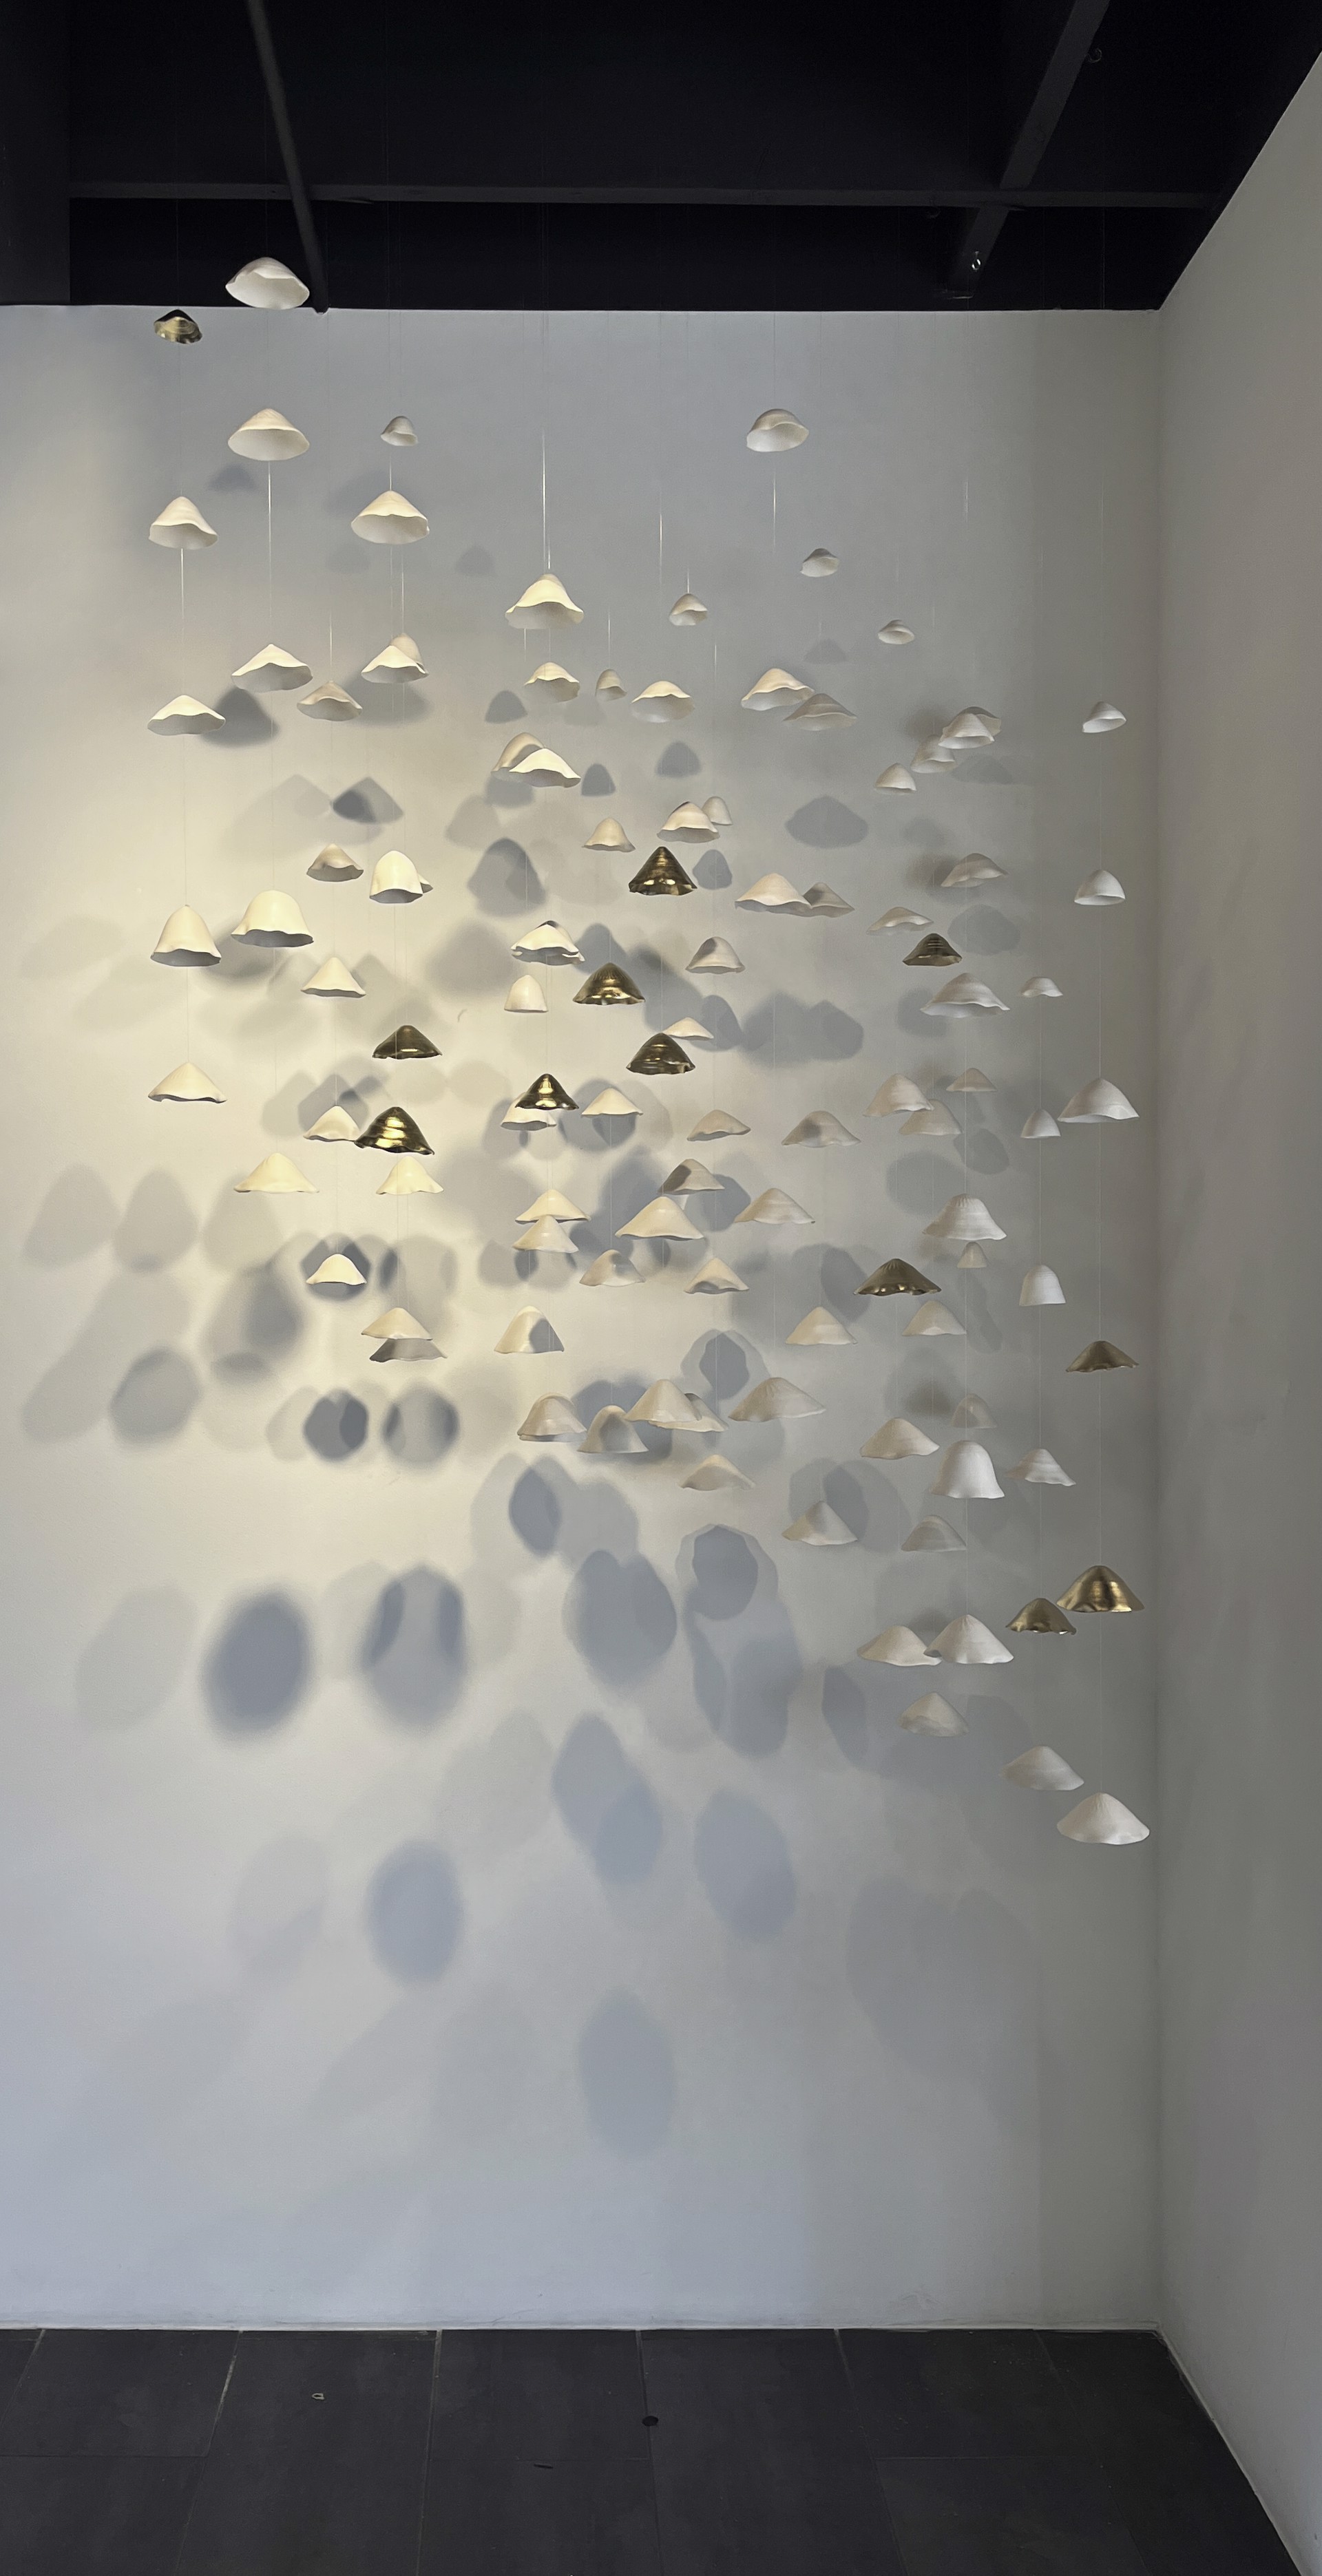 Lucrecia Waggoner Porcelain Wall Installation Custom Artwork Lucrecia Waggoner Floating Garden, 2022 Polished porcelain with moongold, suspended on wire7 x 4 x 2 ft